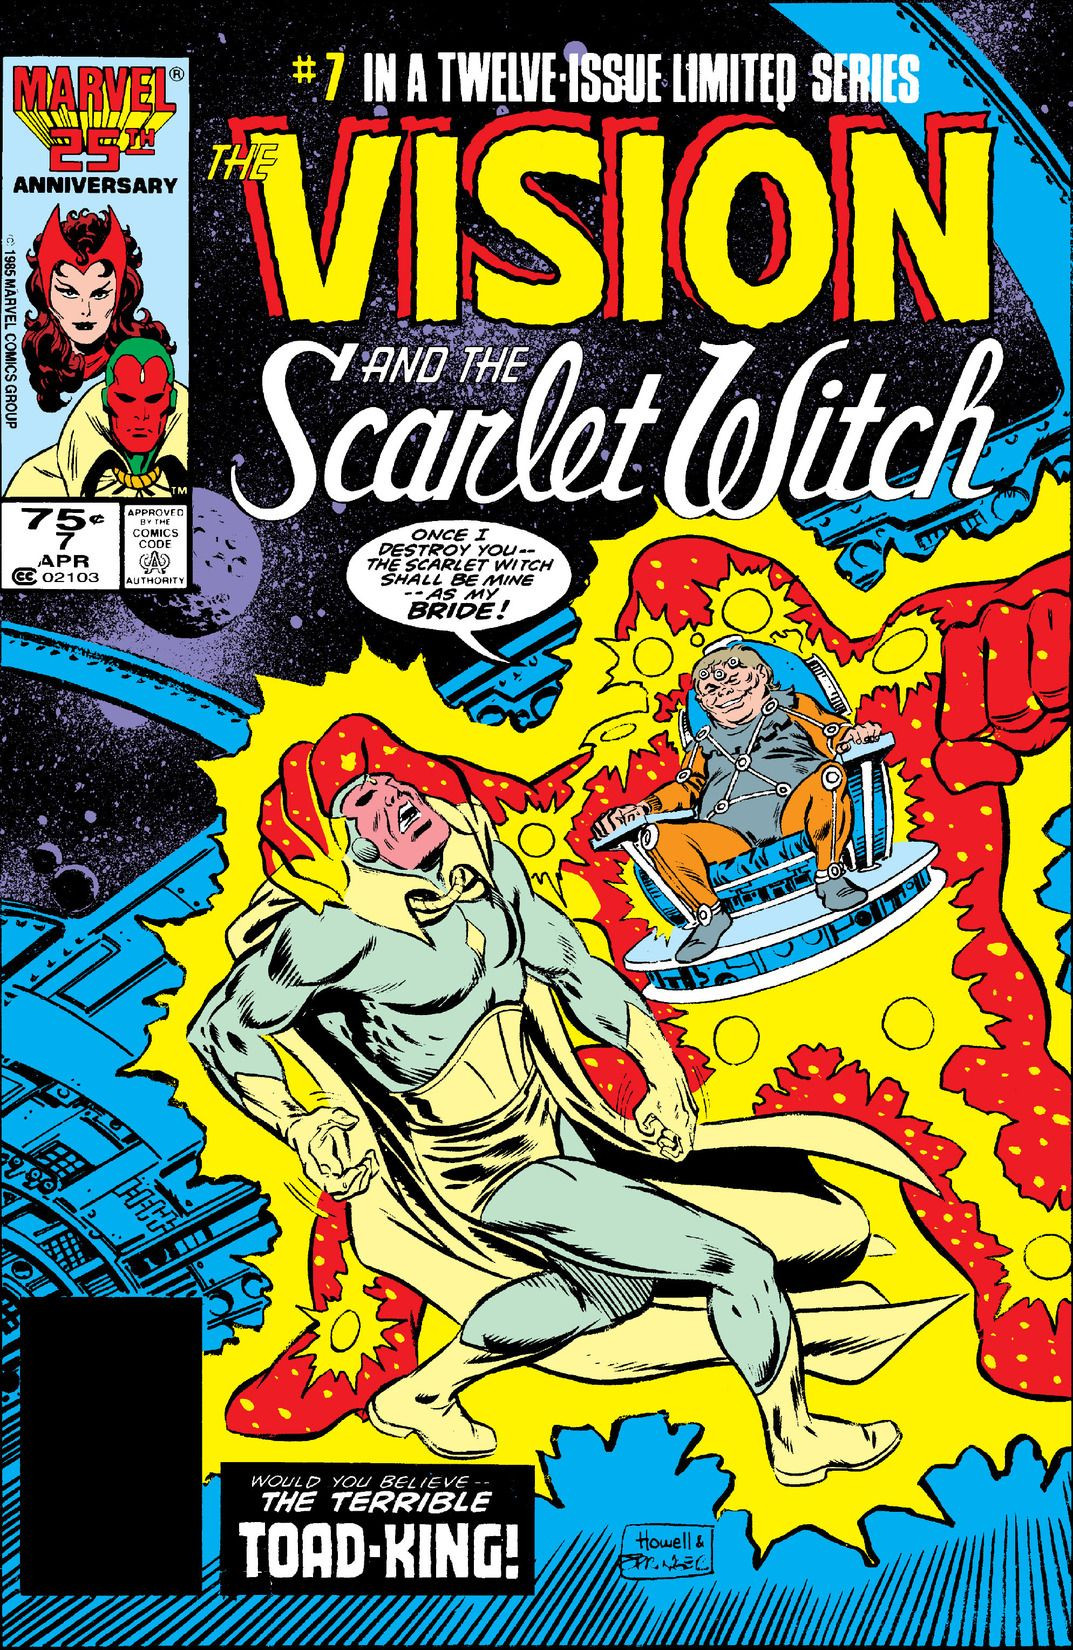 Vision and the Scarlet Witch (1985) #1, Comic Issues